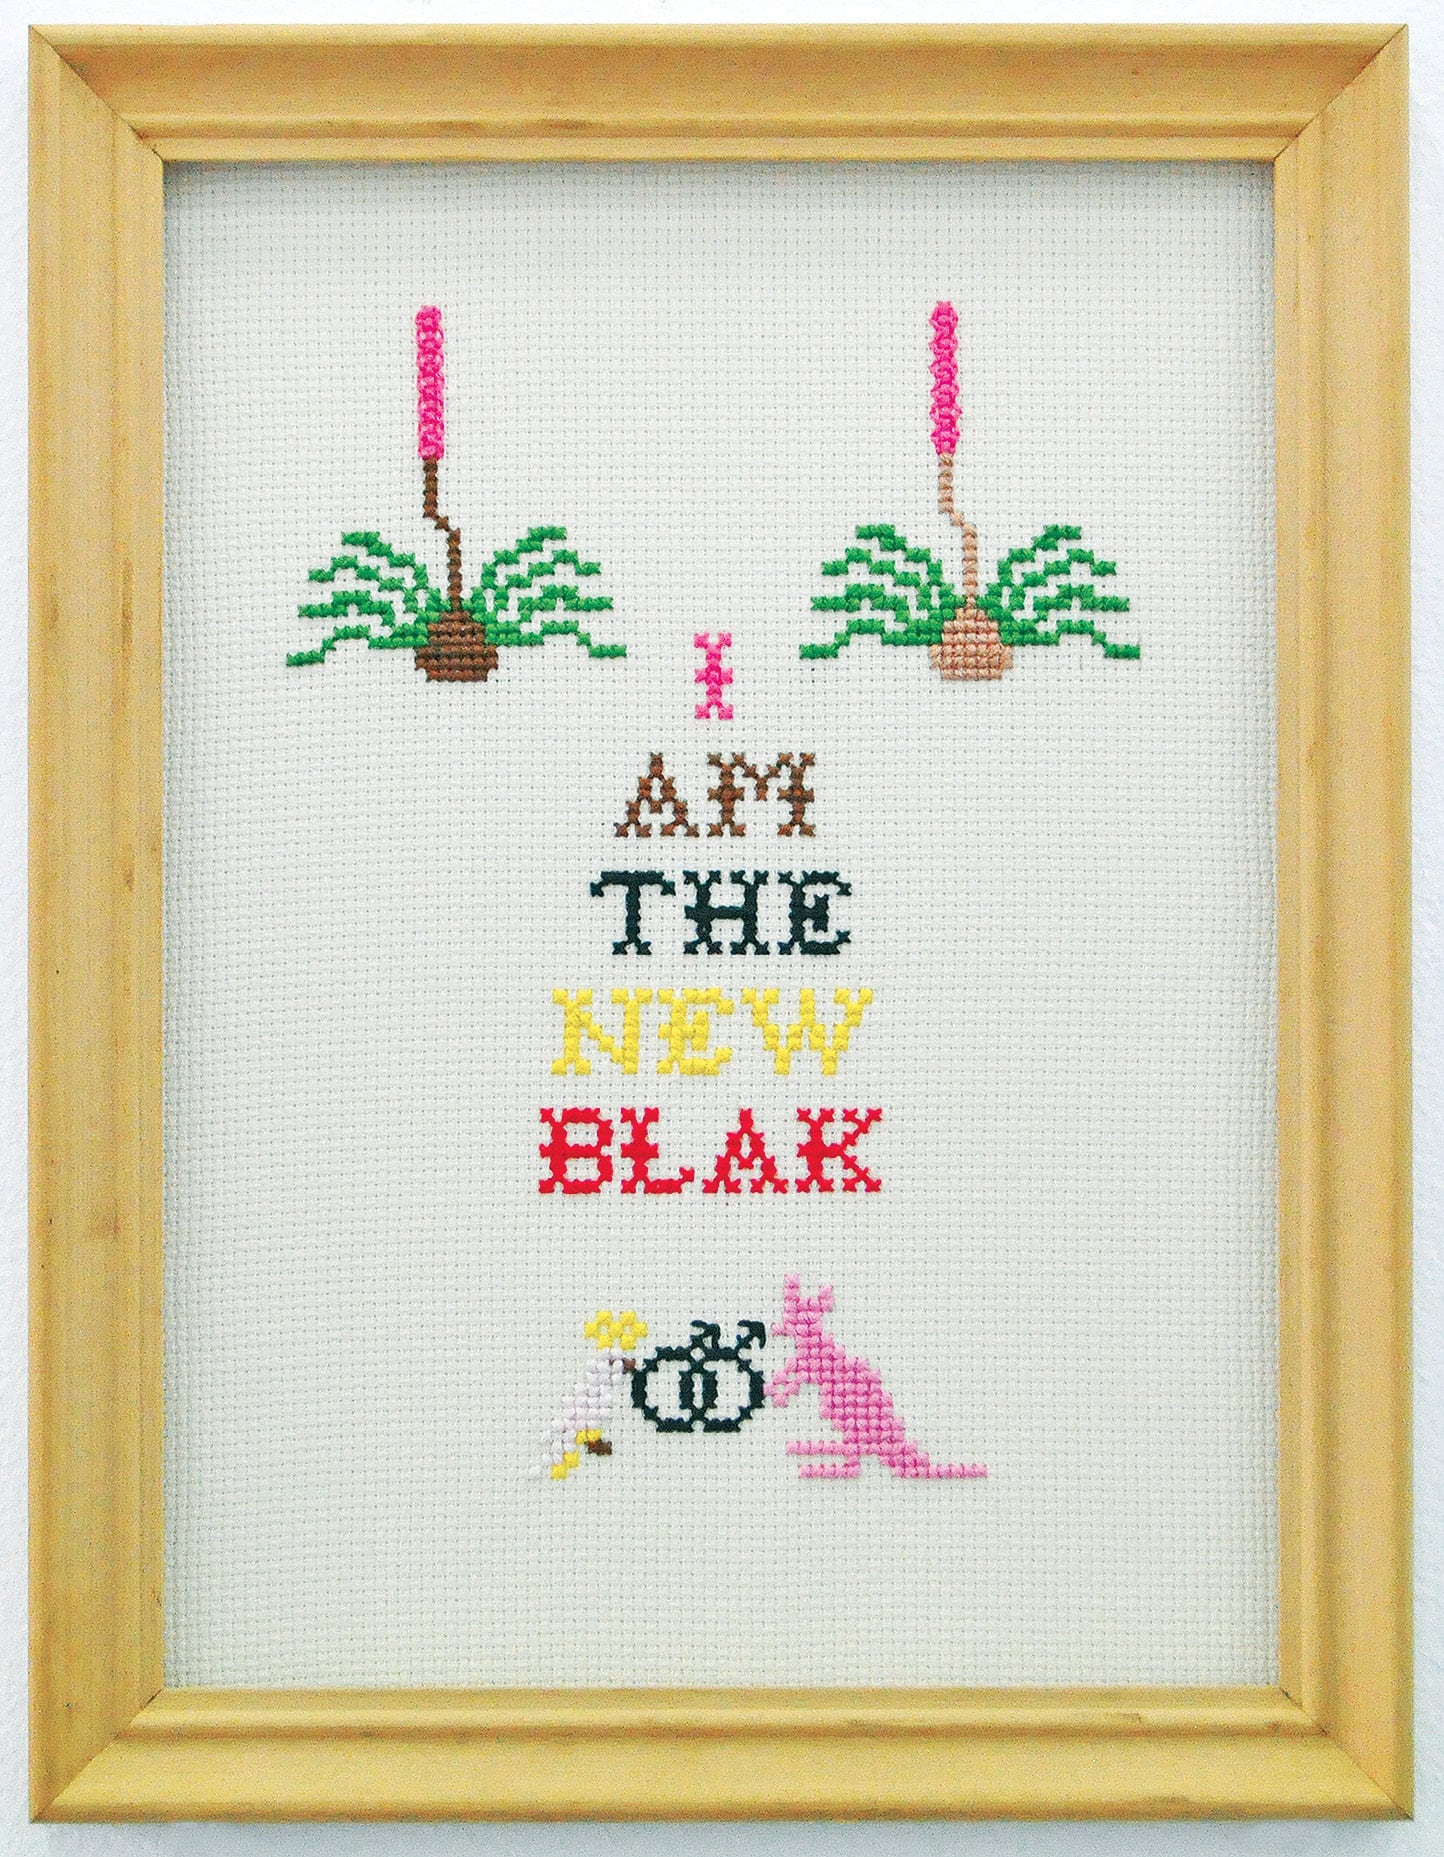 Dale Harding, <em>Blakboy, Blakboy, the colour of your skin is your pride and joy</em> 2012. From the Colour By Number series. Cotton thread, cloth, found timber frame. 26 × 34 × 3 cm. Collection of Tony Albert, Warrang Sydney